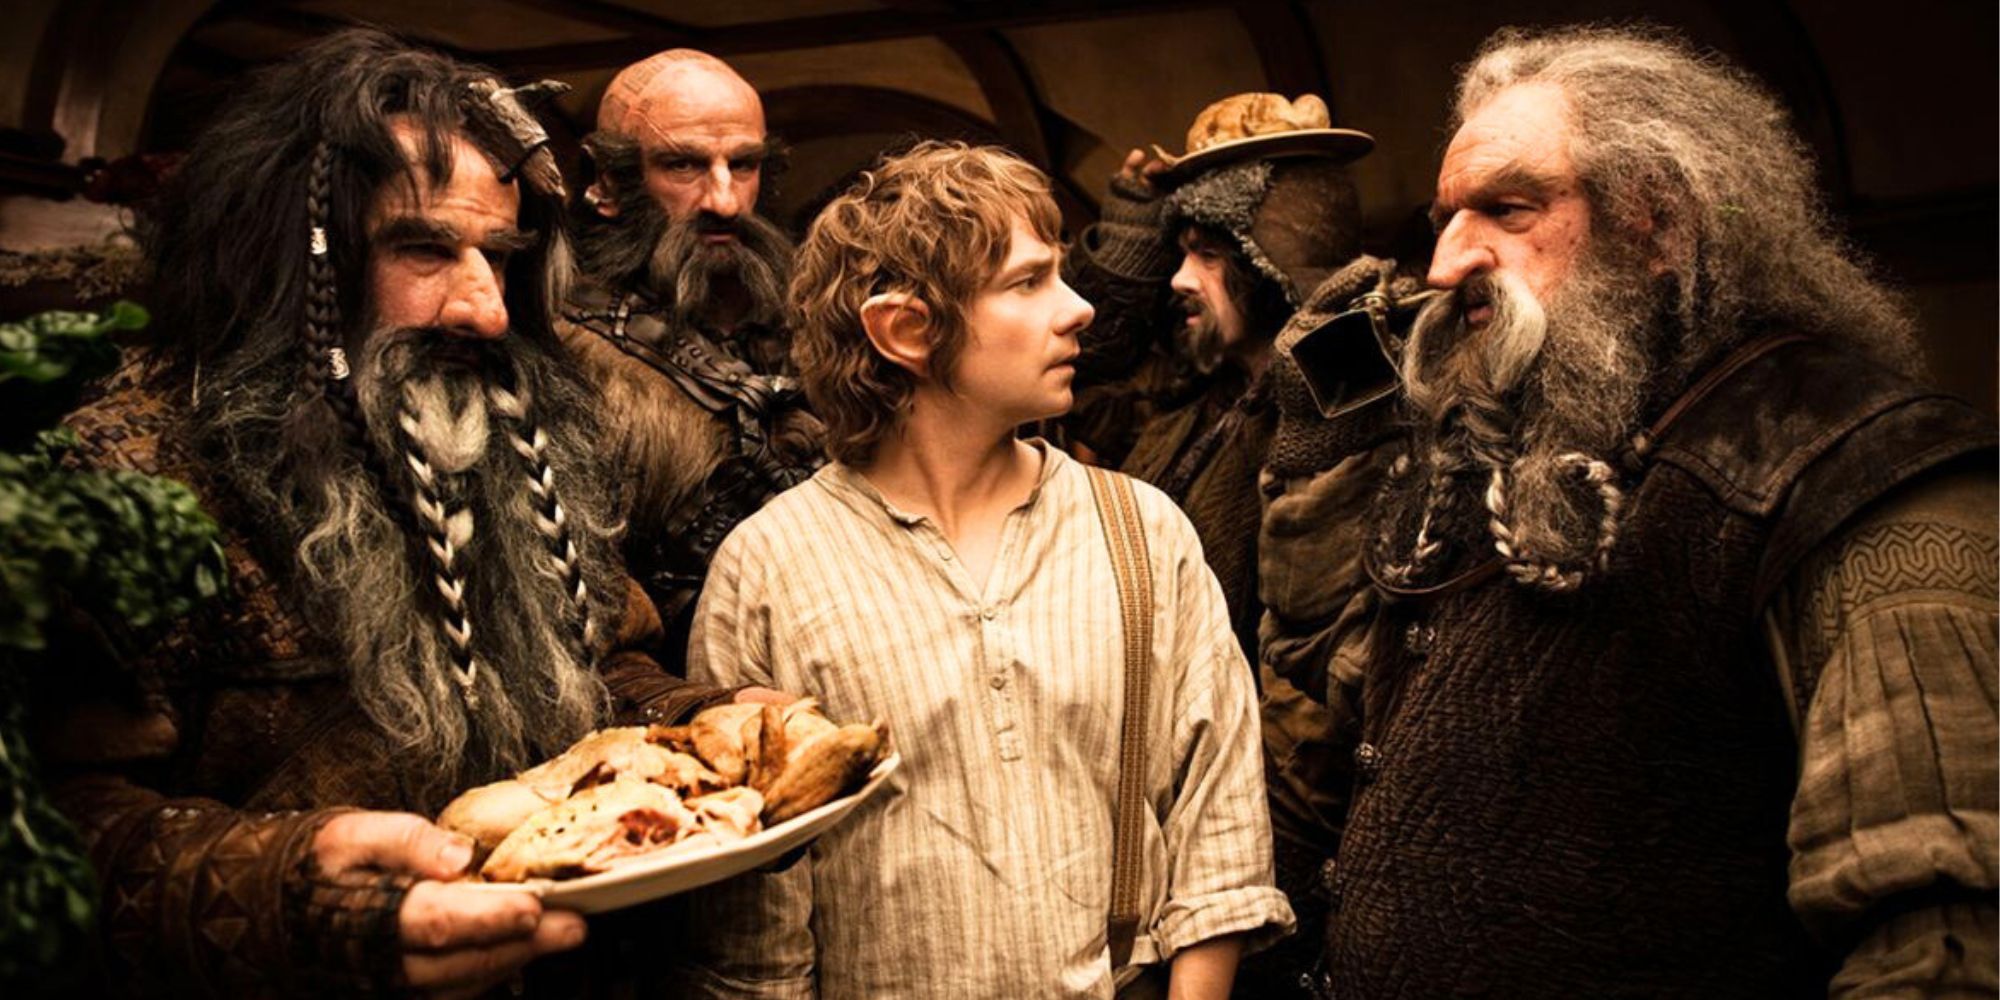 Martin Freeman surrounded by several individuals in The Hobbit An Unexpected Journey